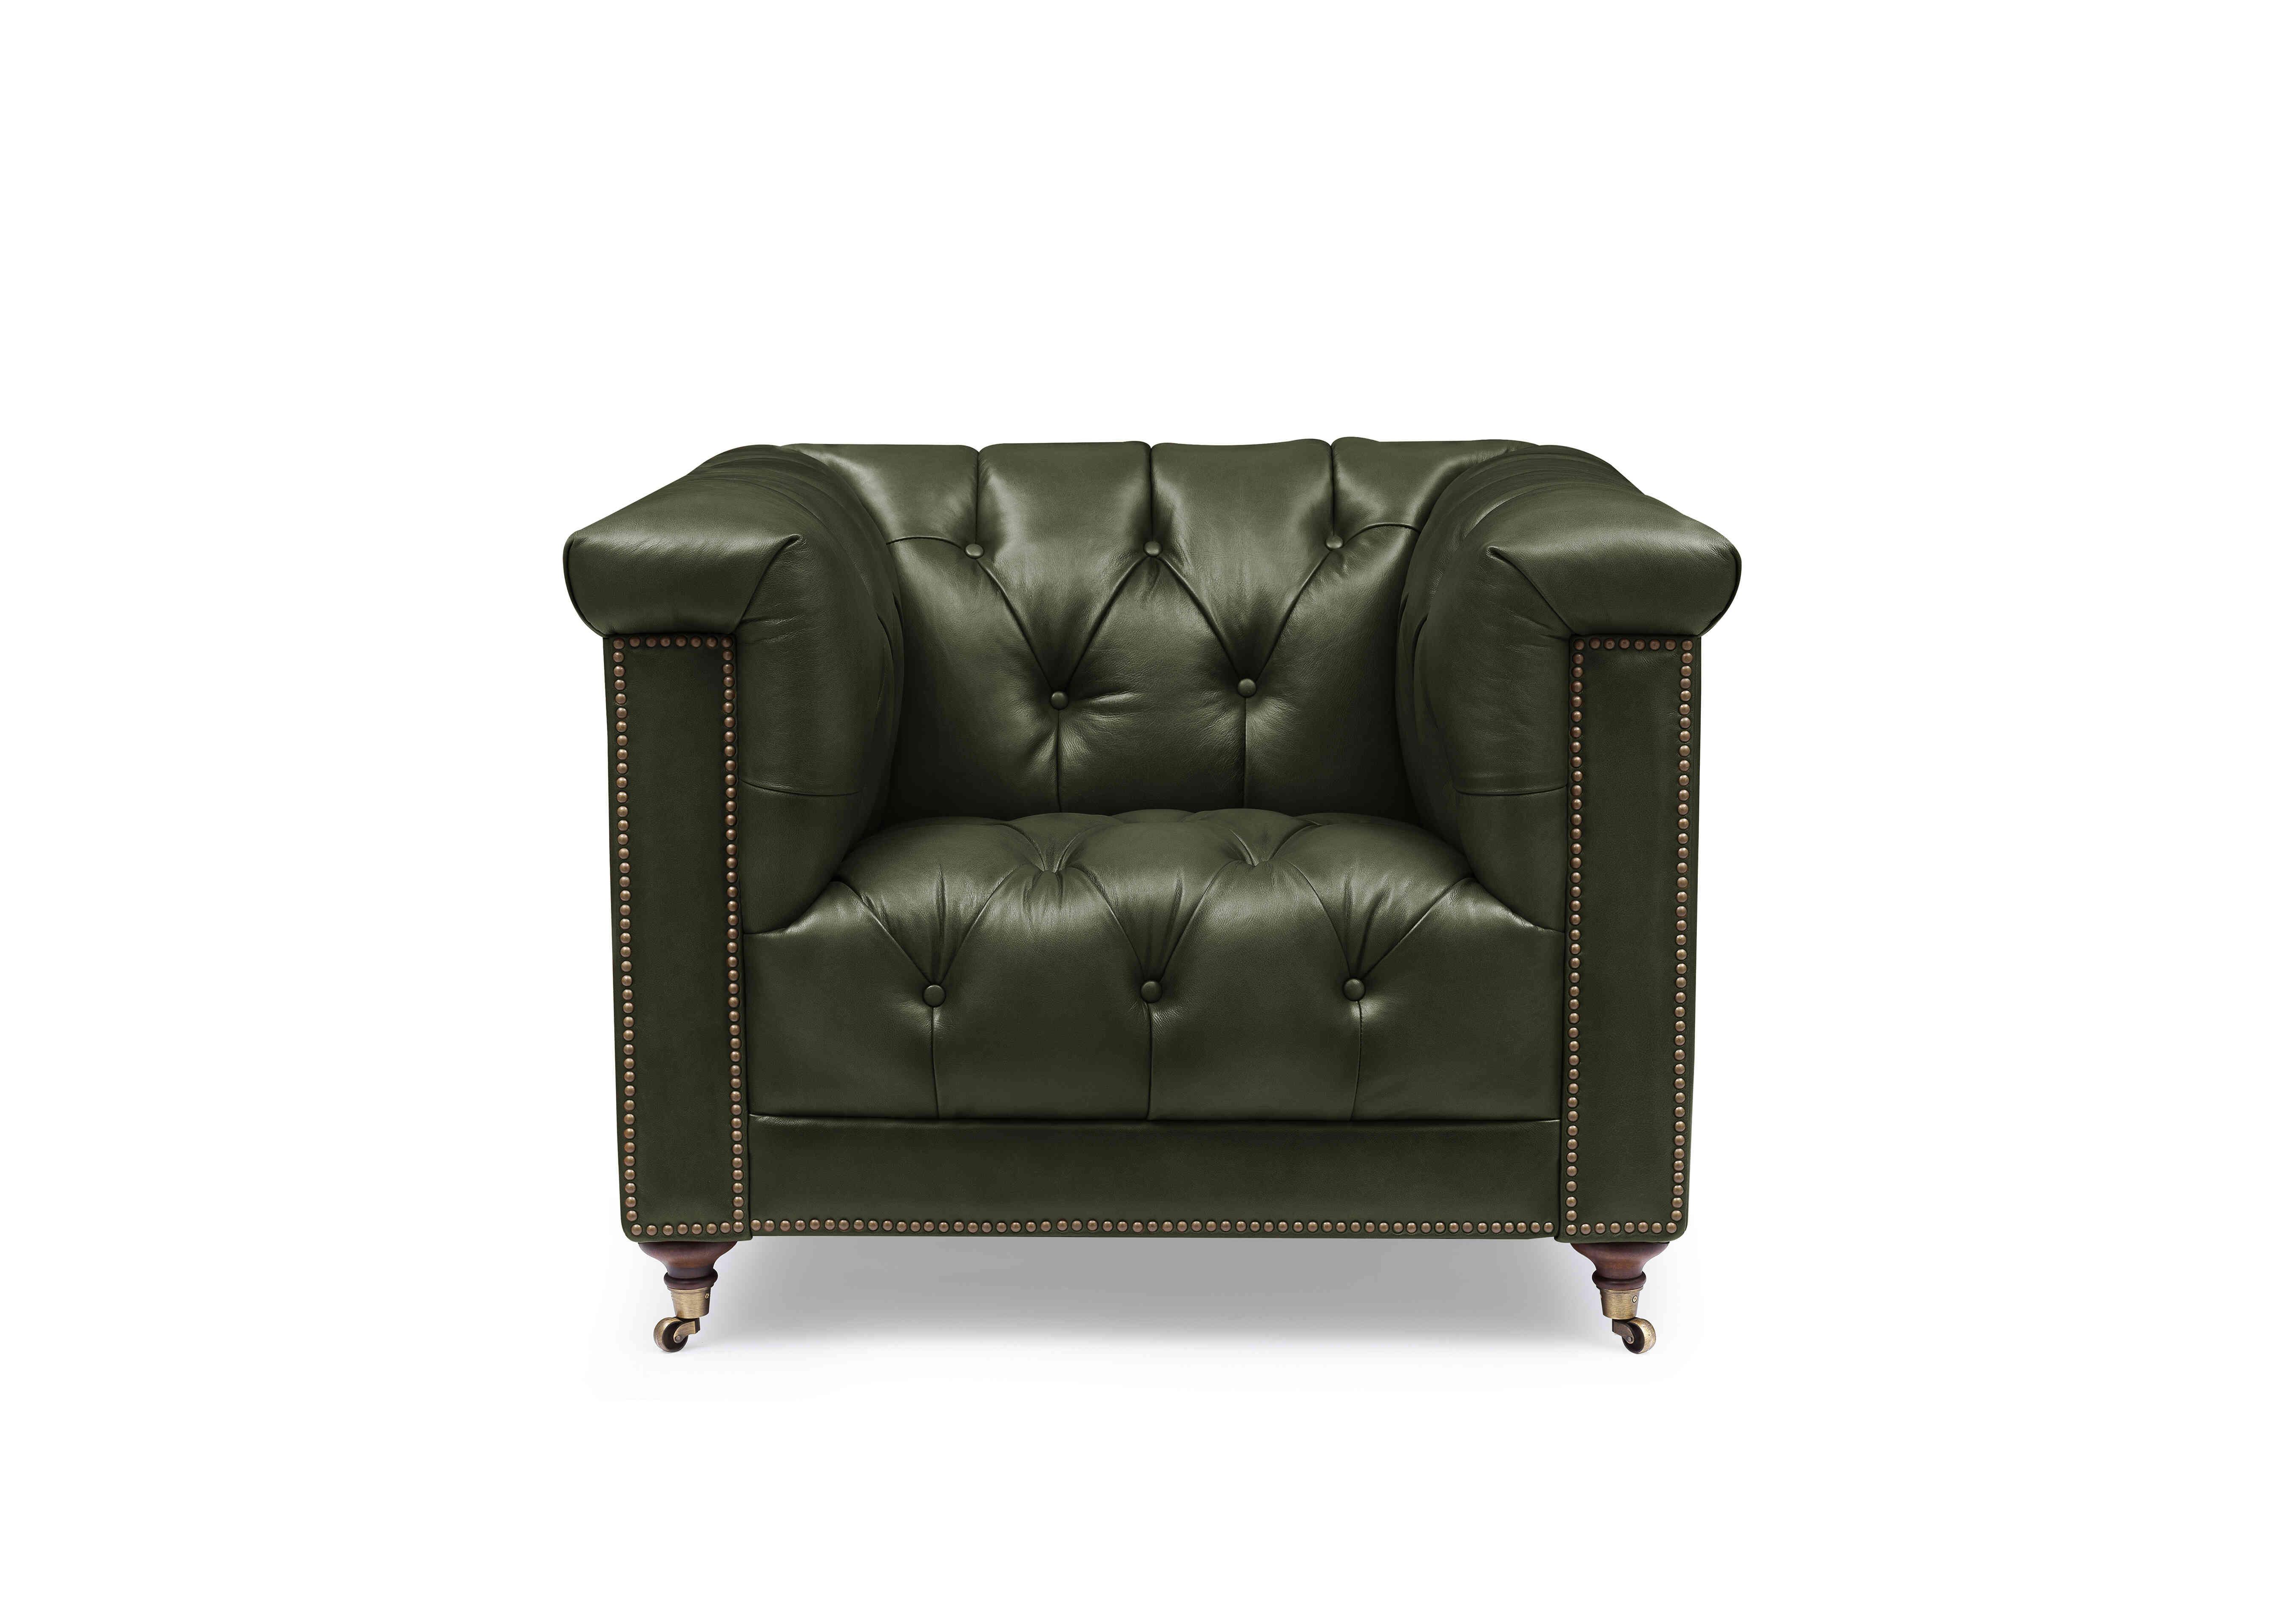 Wallace Leather Chesterfield Chair in X3y1-1965ls Emerald on Furniture Village